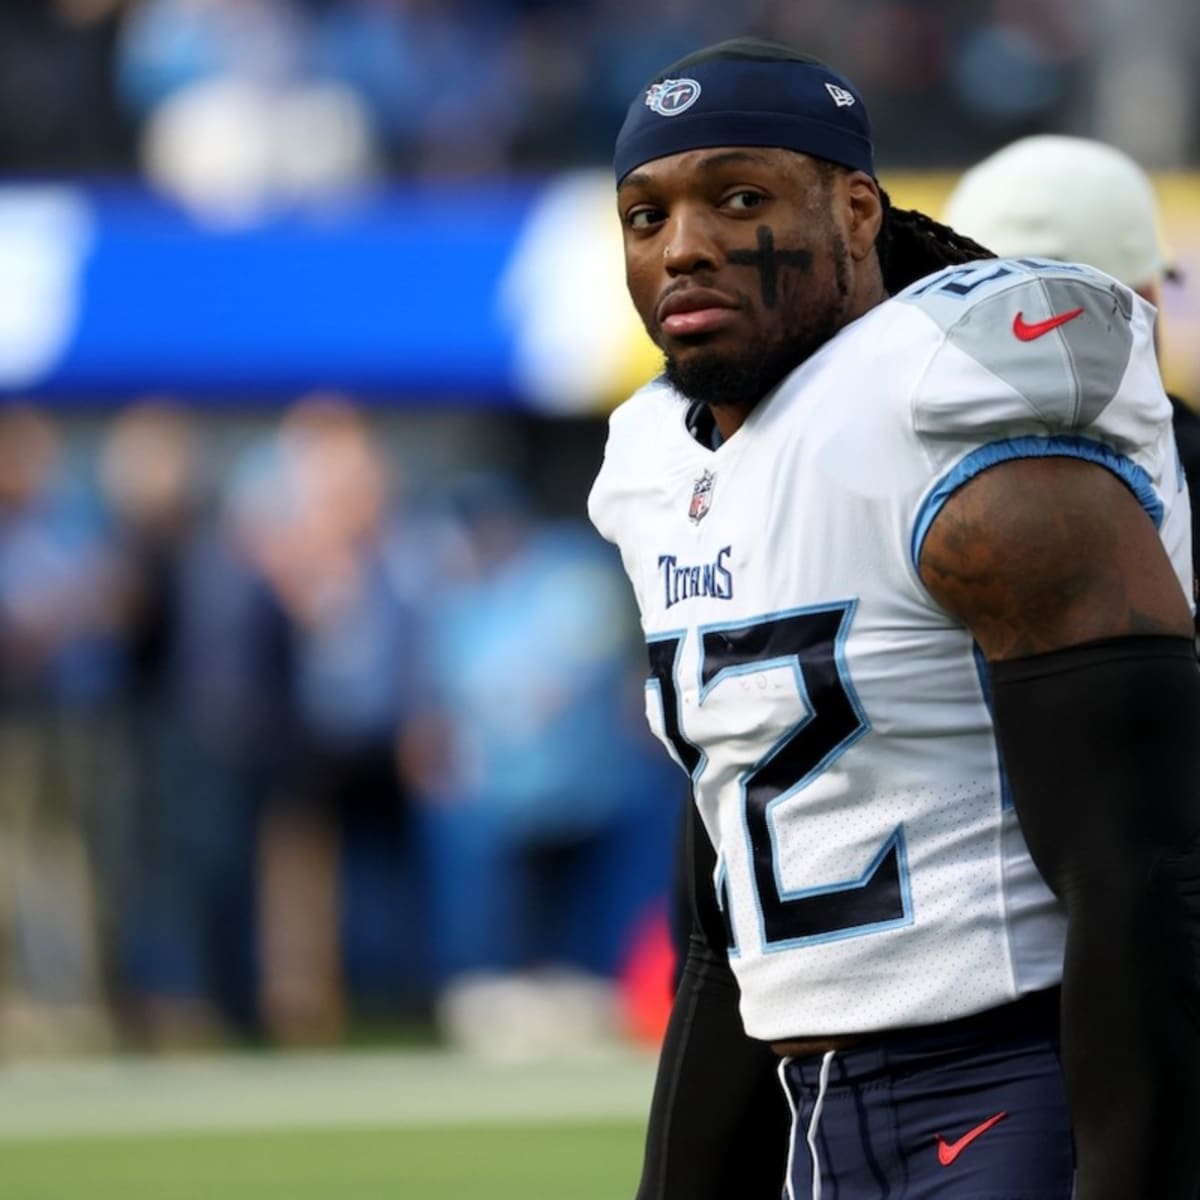 Steelers' next challenge awaits in form of NFL's leading rusher, Derrick  Henry